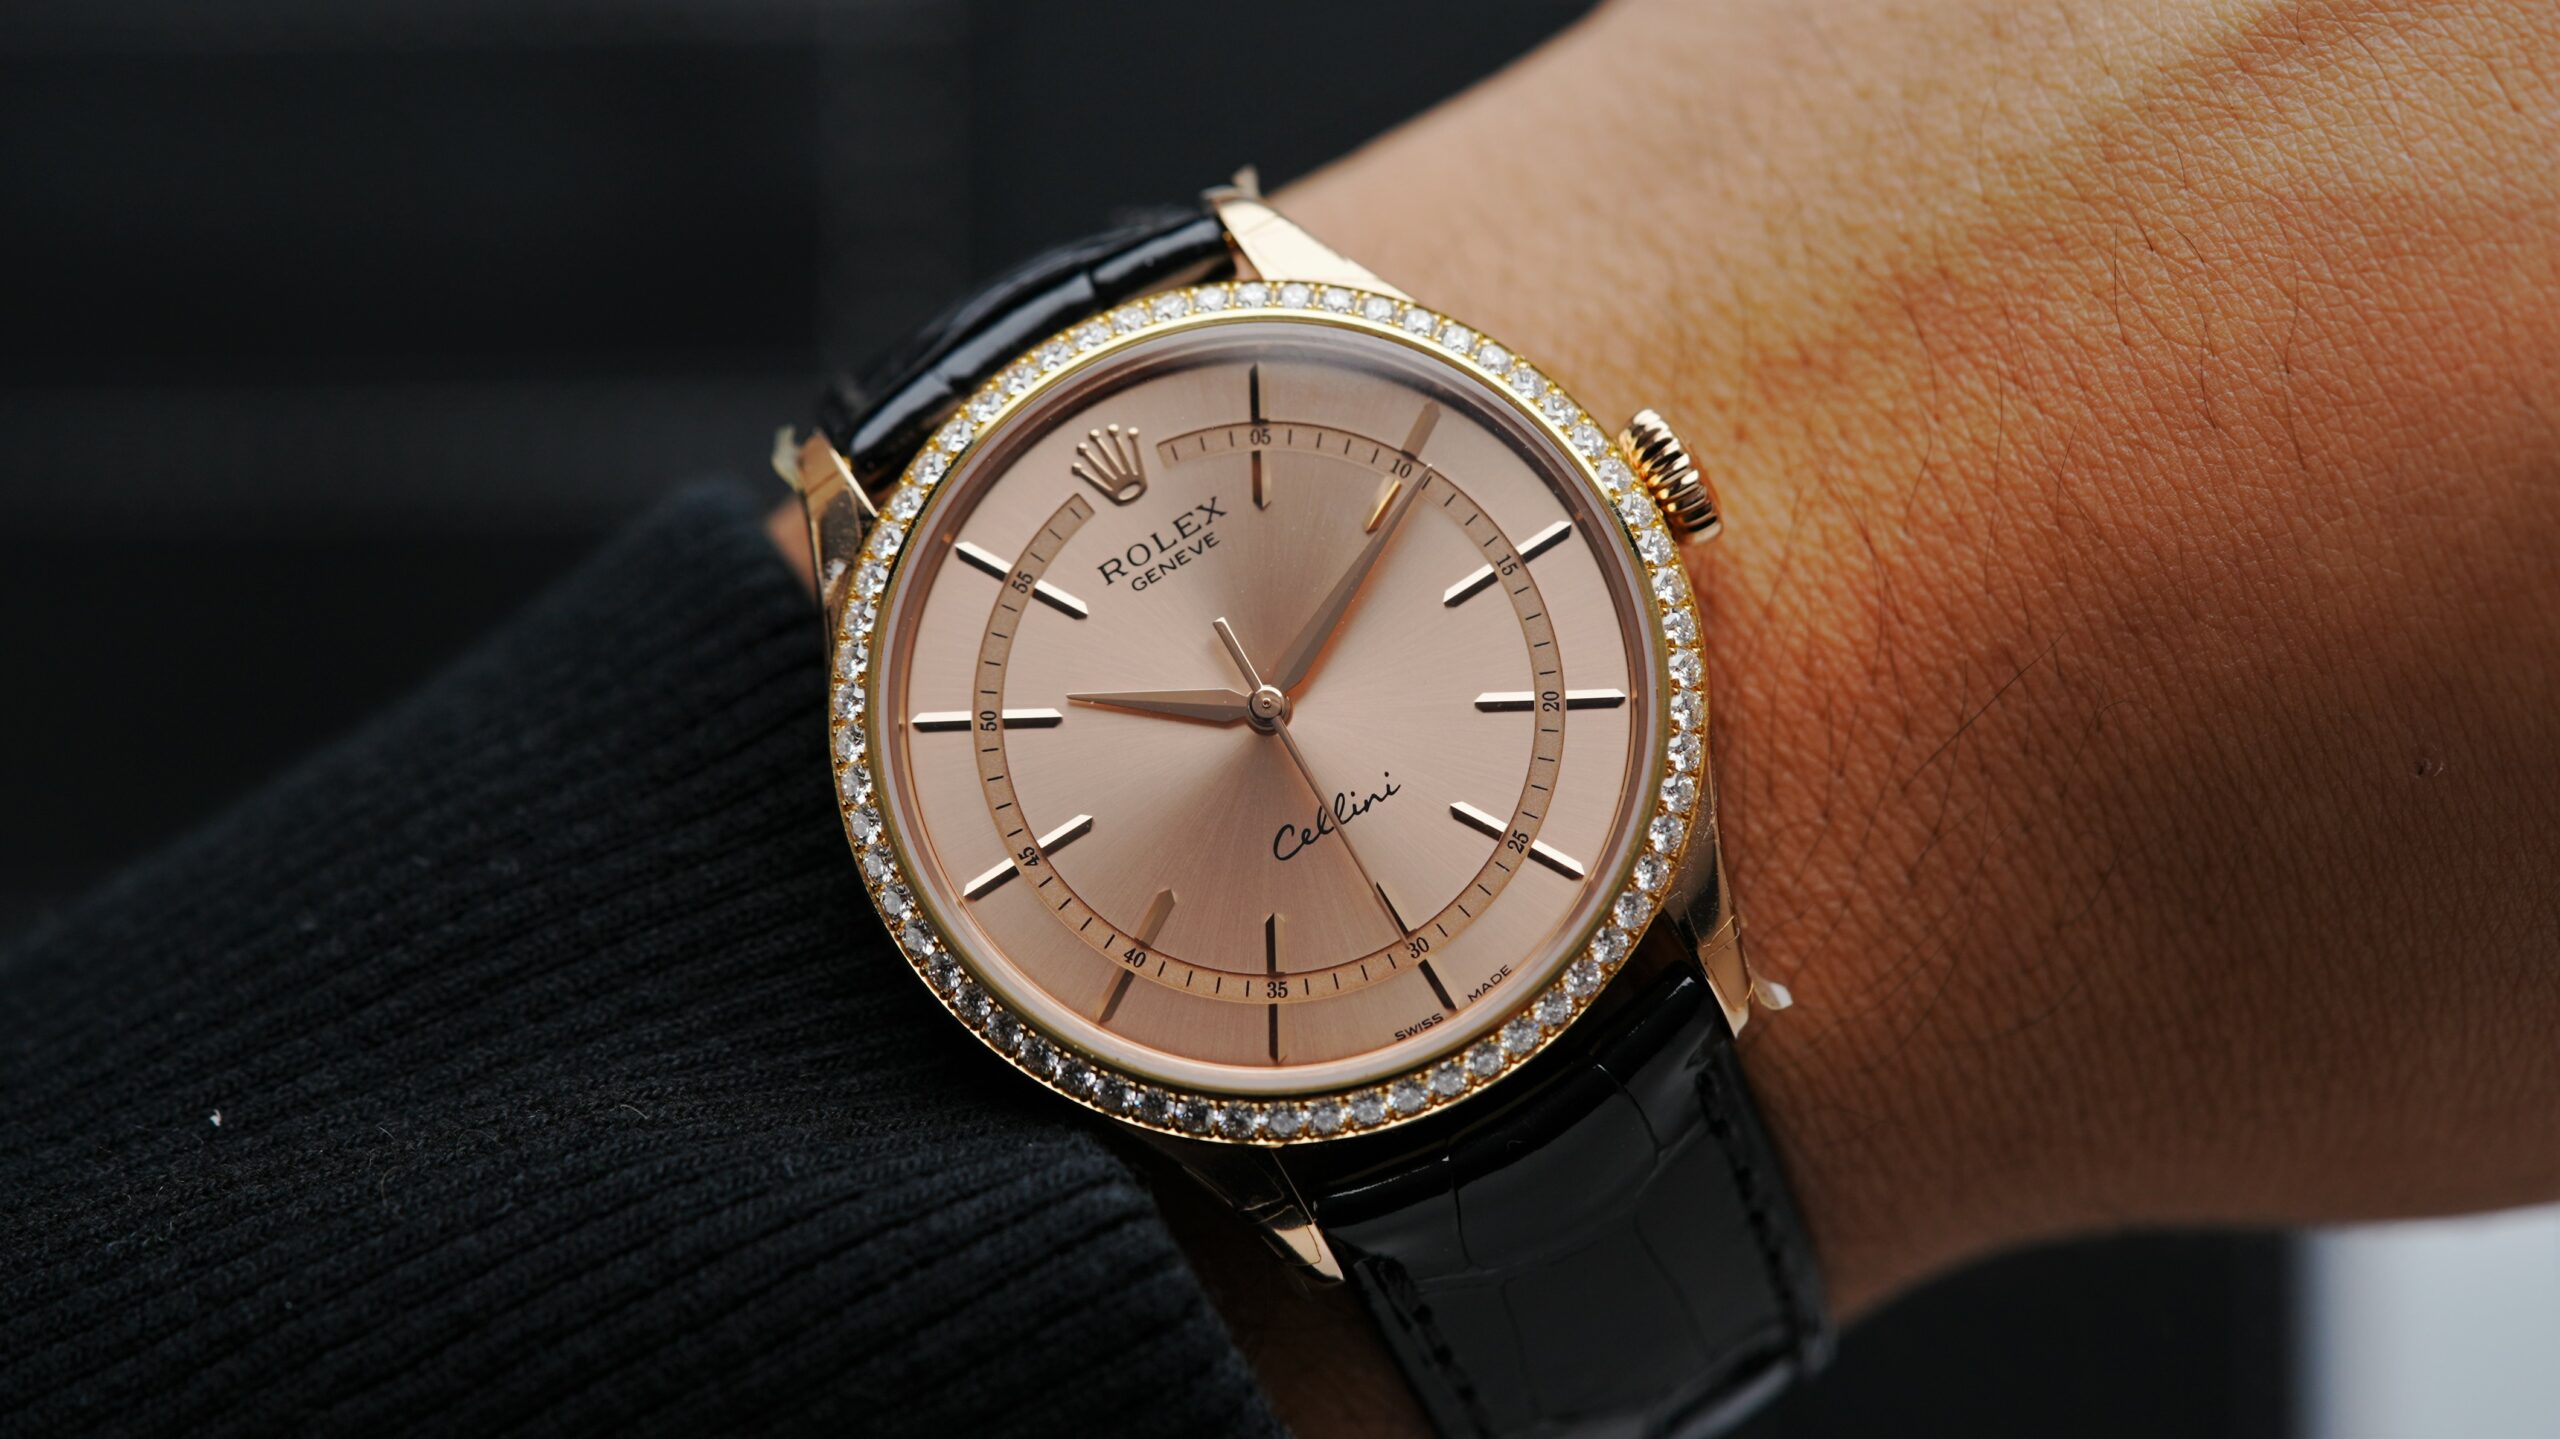 Rolex Cellini Time Salmon Rose Gold watch displayed on wrist.